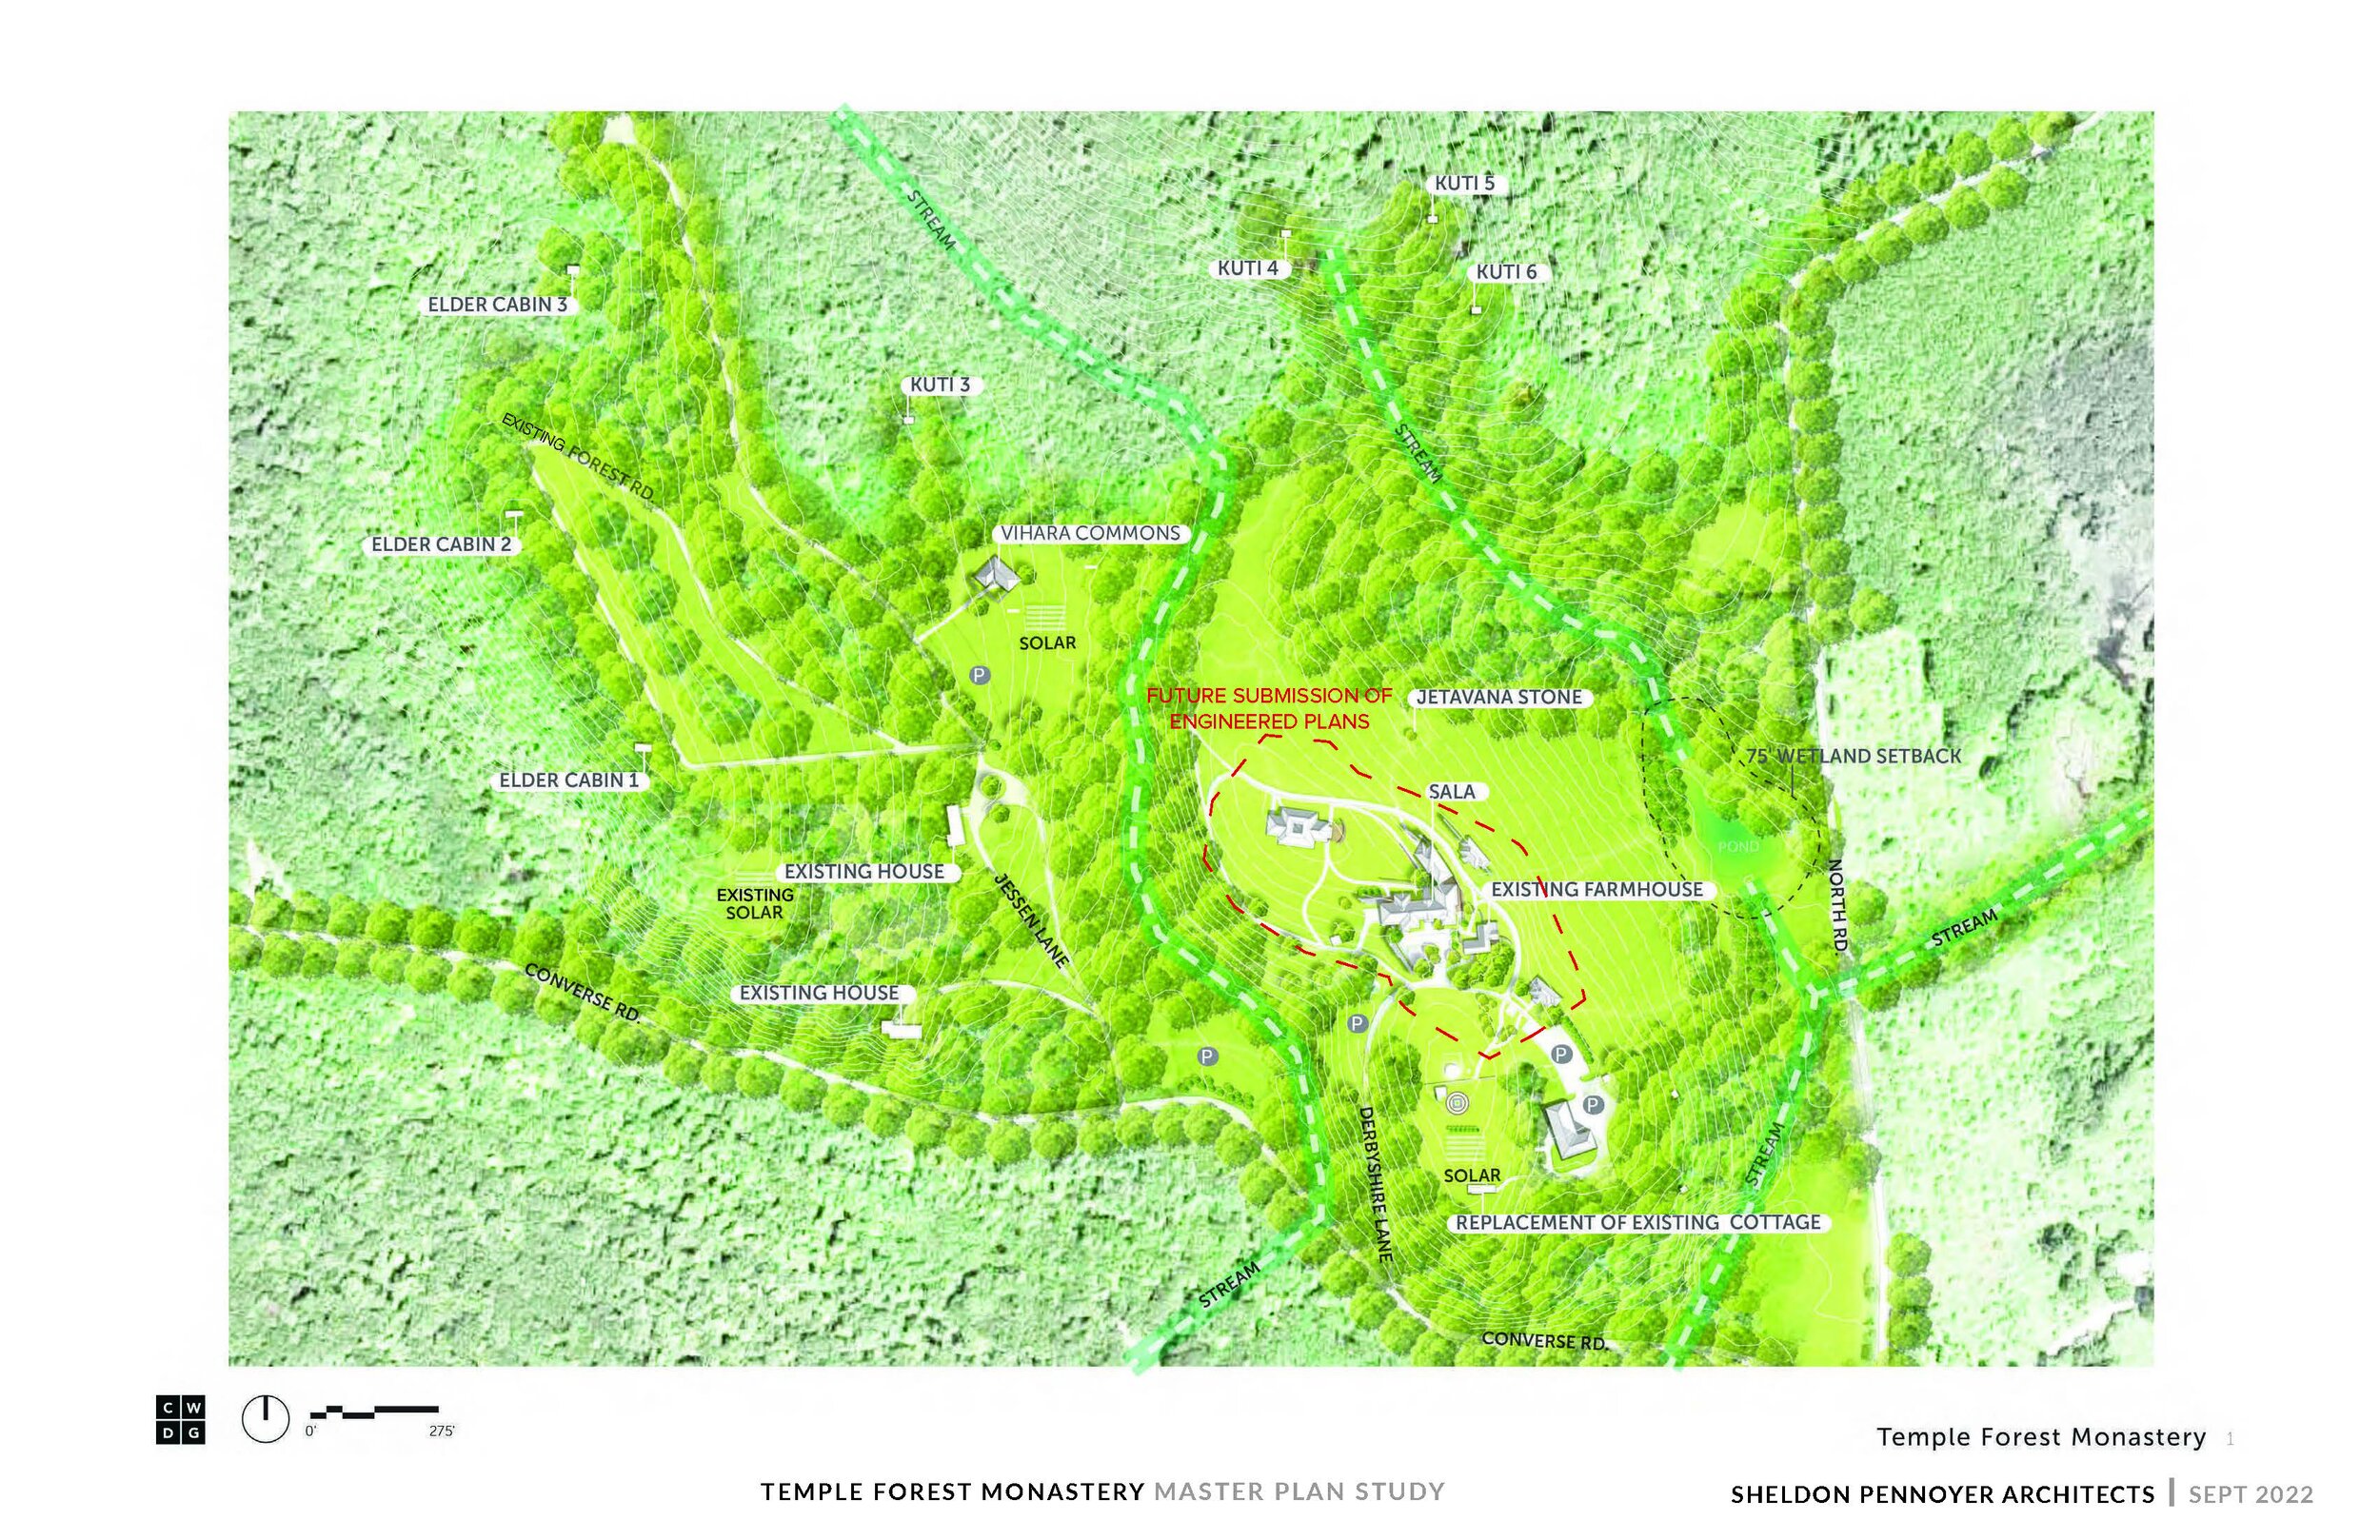 2022-09-20 Temple Forest Monastery Master Plan Study – Edited-Optimized copy for images_Page_03.jpg